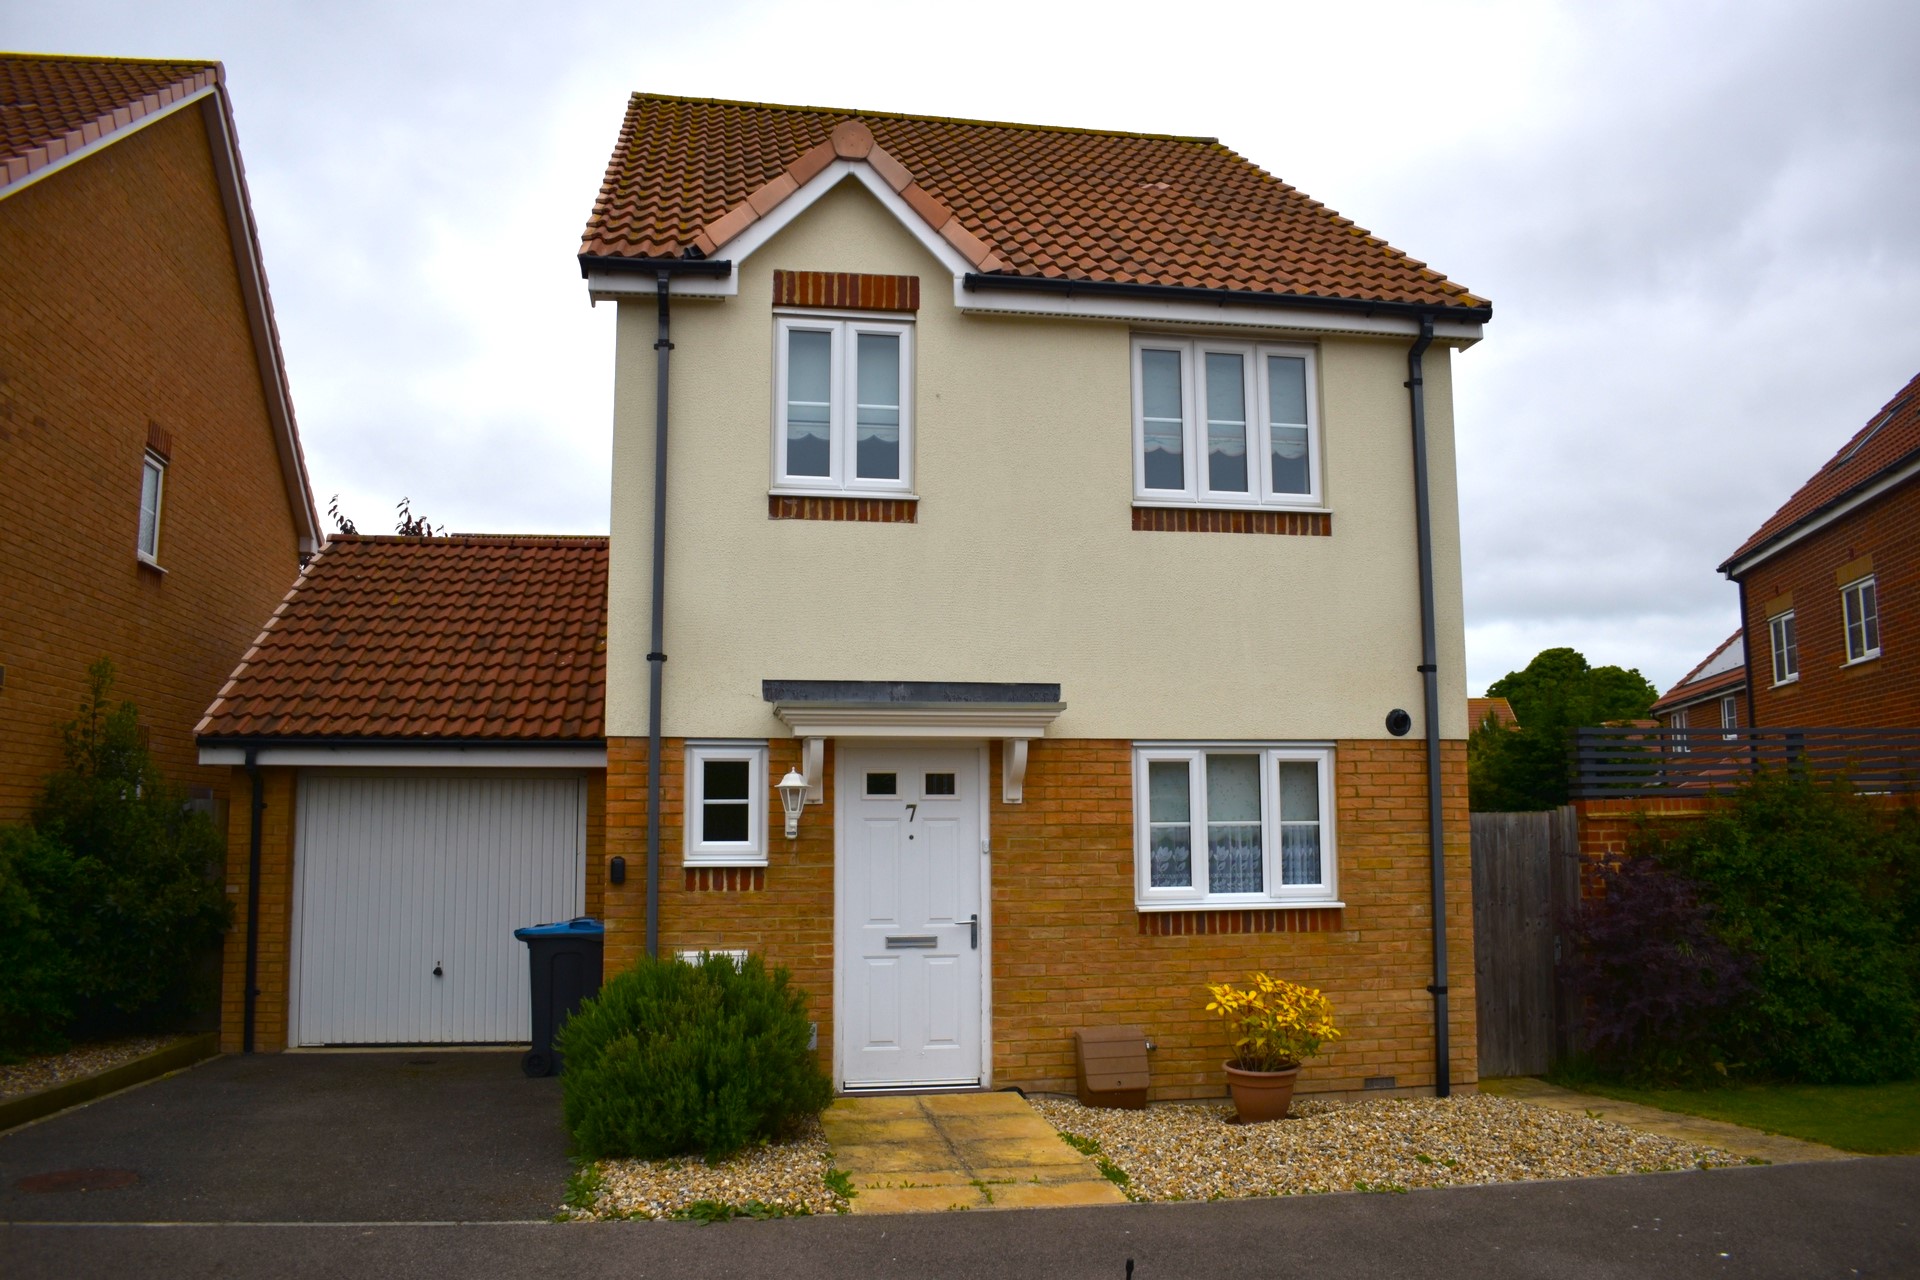 EARLY VIEWING RECOMMENDED!    Henderson Setterfield is delighted to offer this stunning detached house with garden, situated within walking distance of the popular shops, bars and restaurant of Broadstairs and the beautiful sandy beach at Viking Bay. 